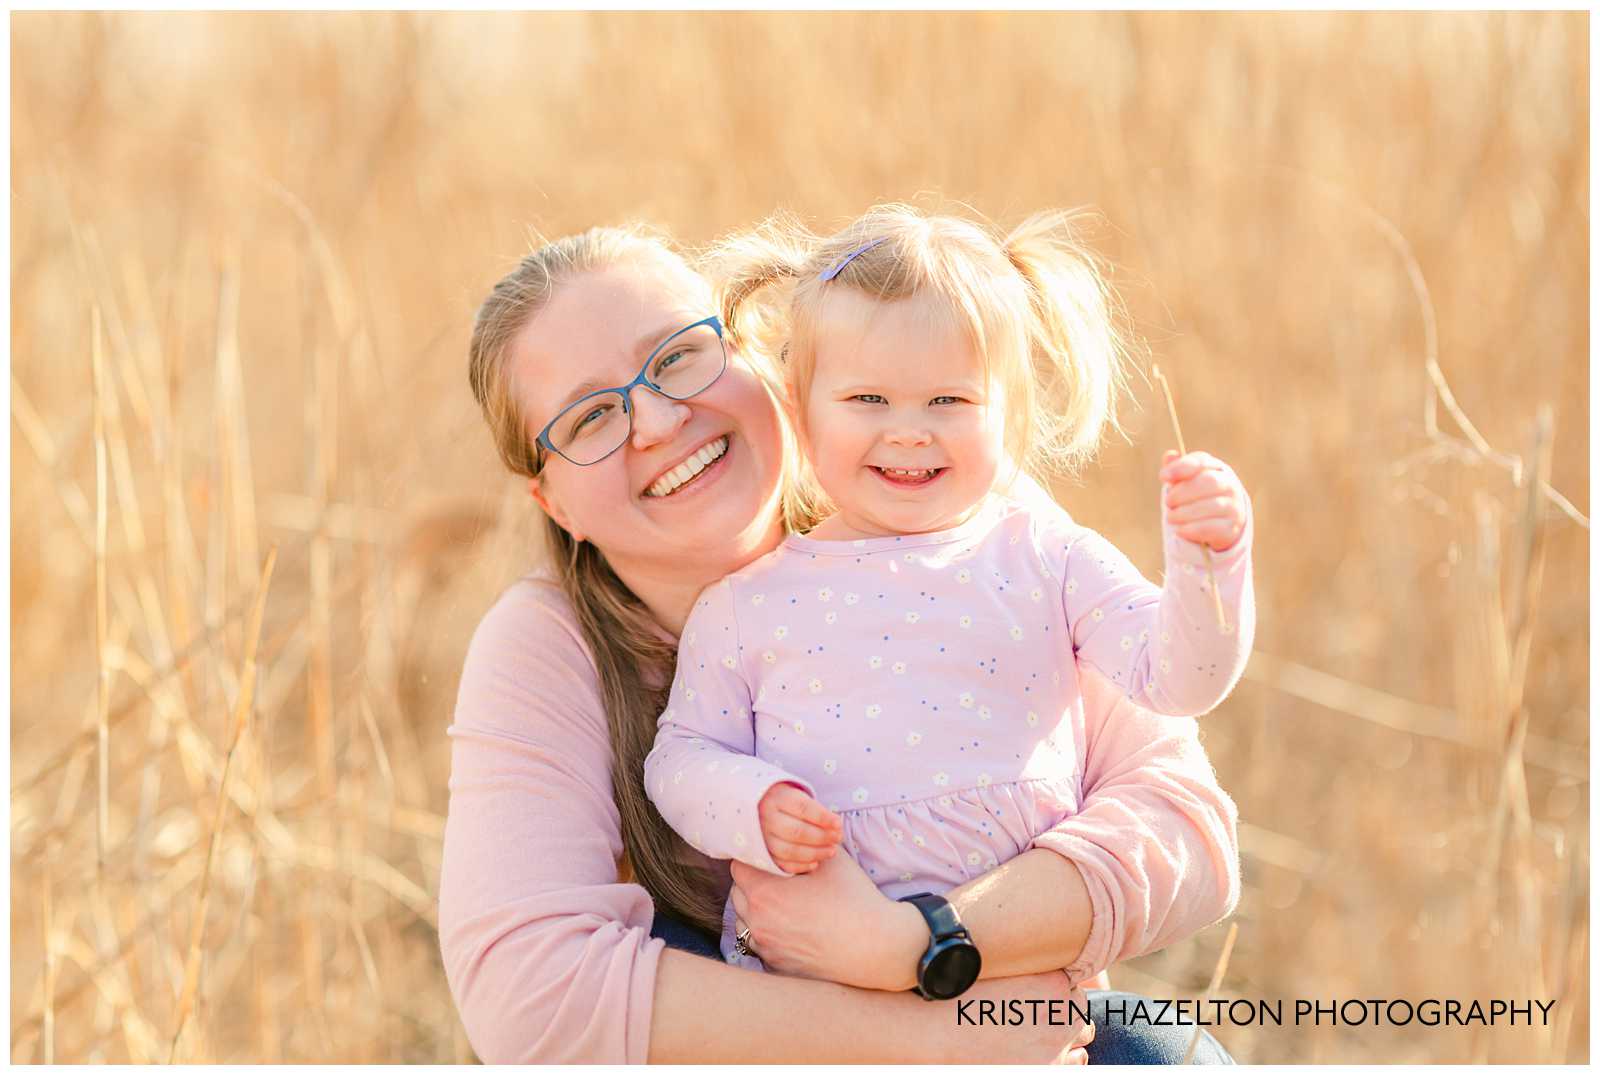 Mom hugging her toddler daughter in a field of yellow grass